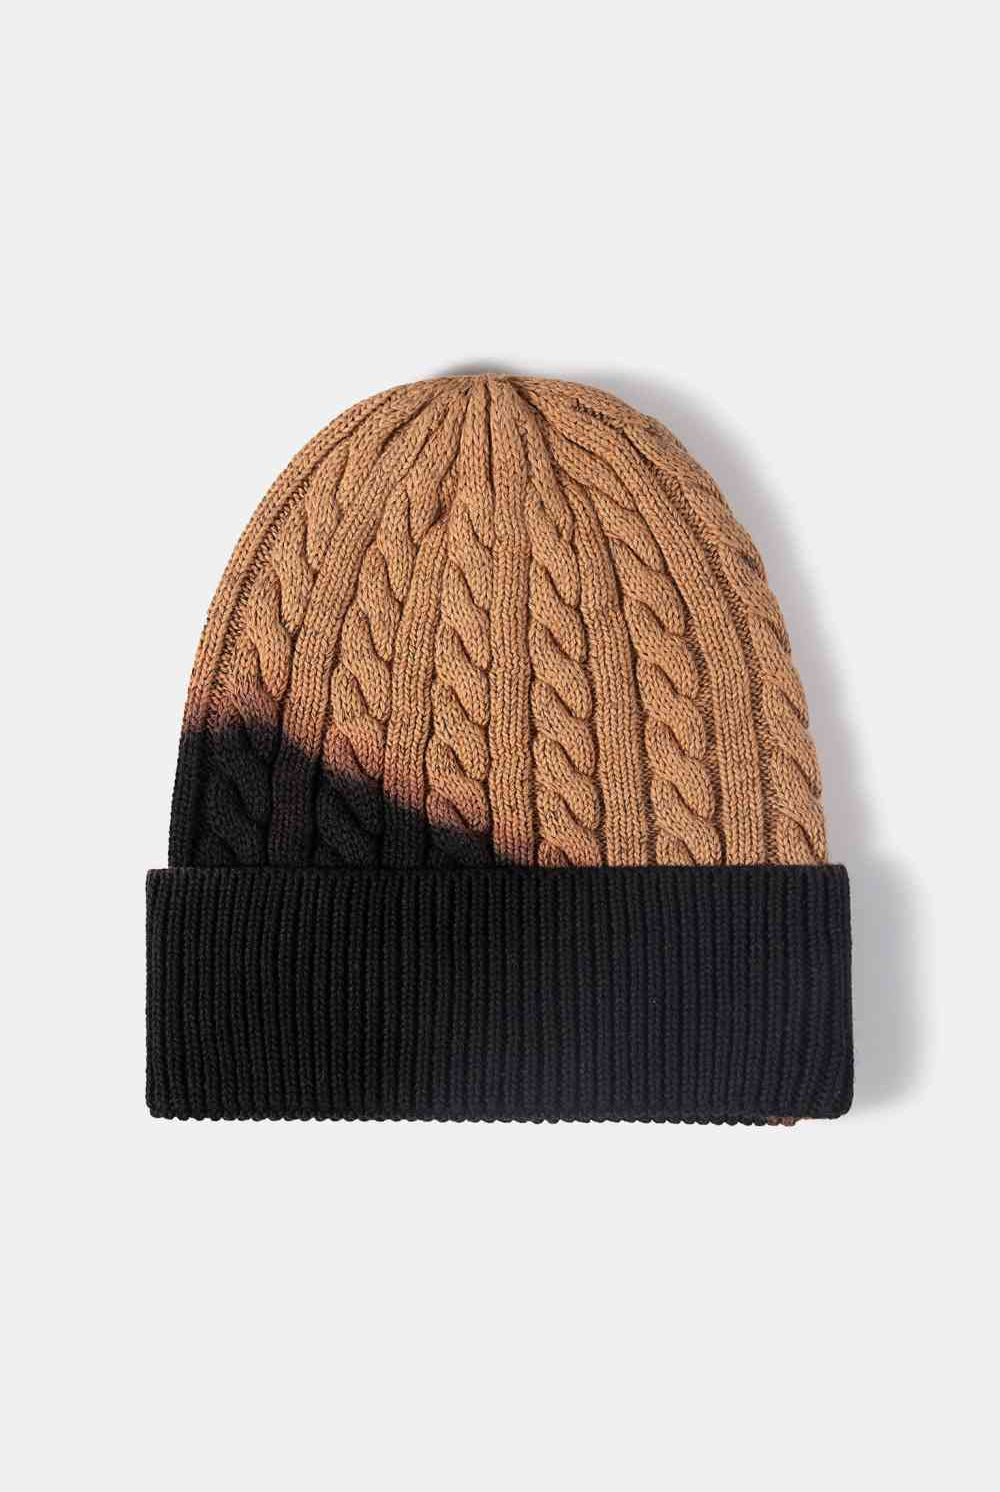 Beige Contrast Tie-Dye Cable-Knit Cuffed Beanie Winter Accessories